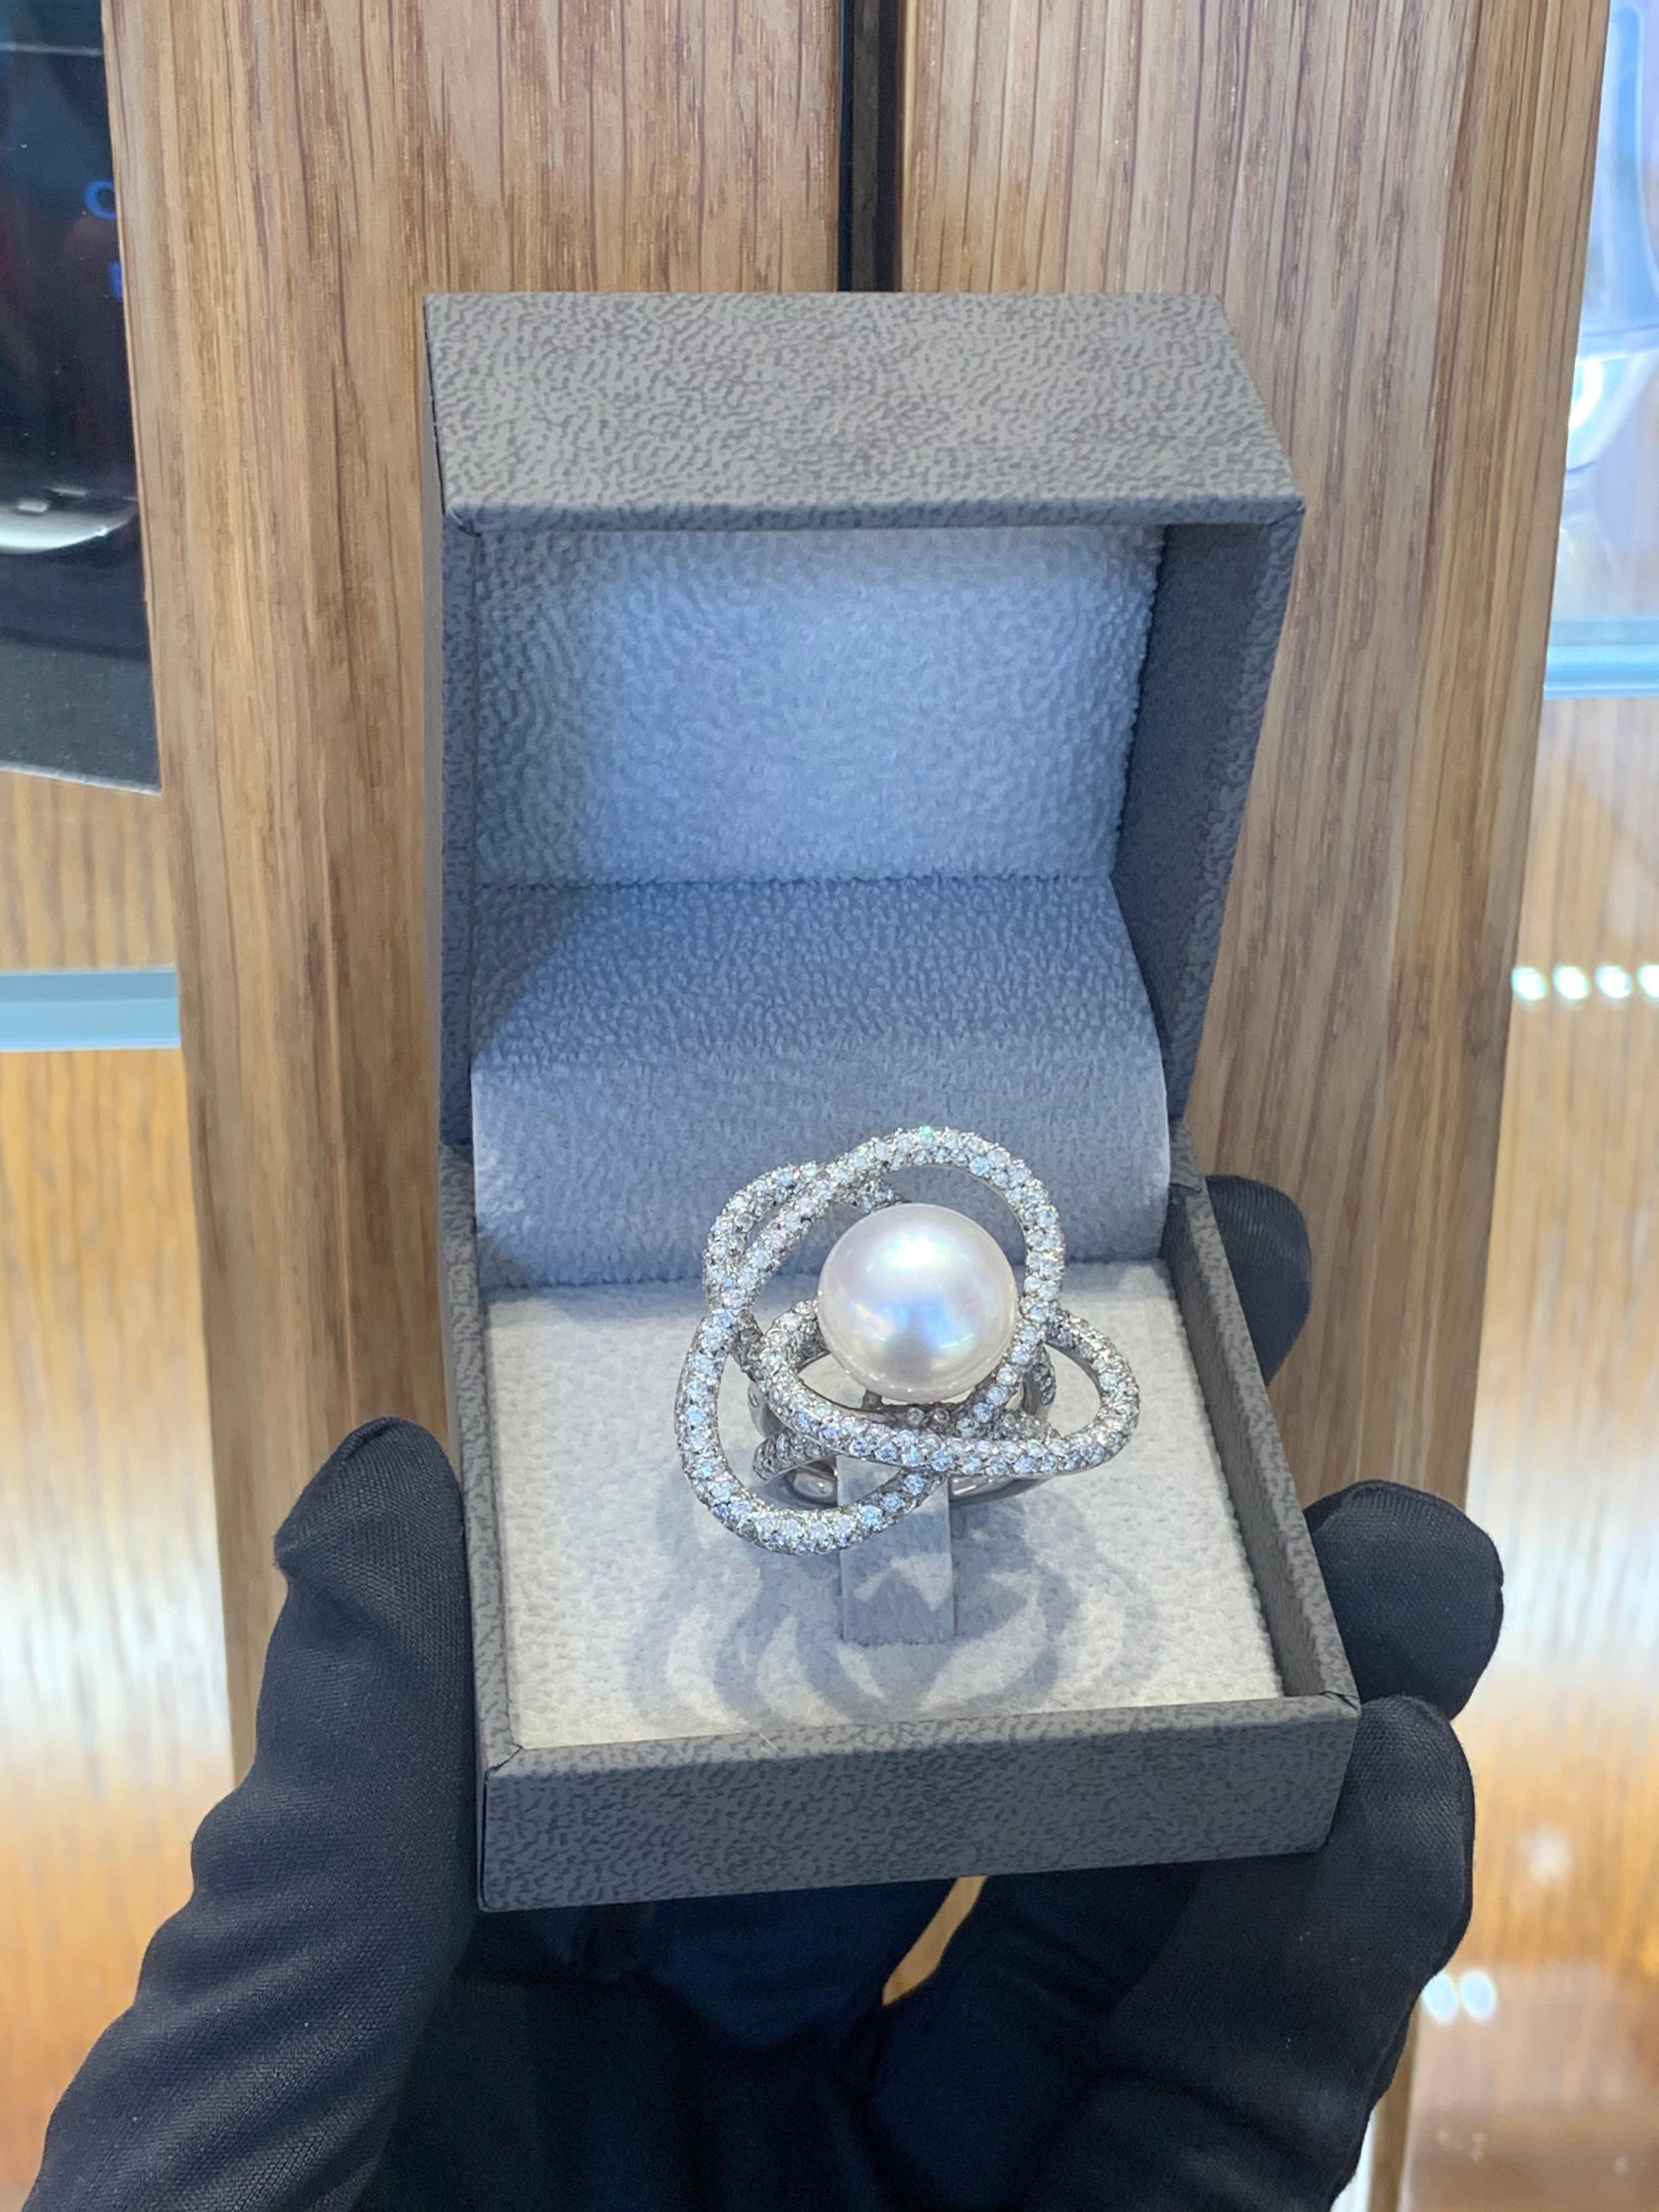 Beautifully Hand Crafted 18k White Gold Large Cocktail Ring Set With a Gorgeous Large White Pearl & Diamonds.
Amazing Shine, Incredible Craftsmanship.
Great Statement Piece.
Very Well Crafted.
Approximately 3.0 Carats Of Diamonds.
Approximately 15mm